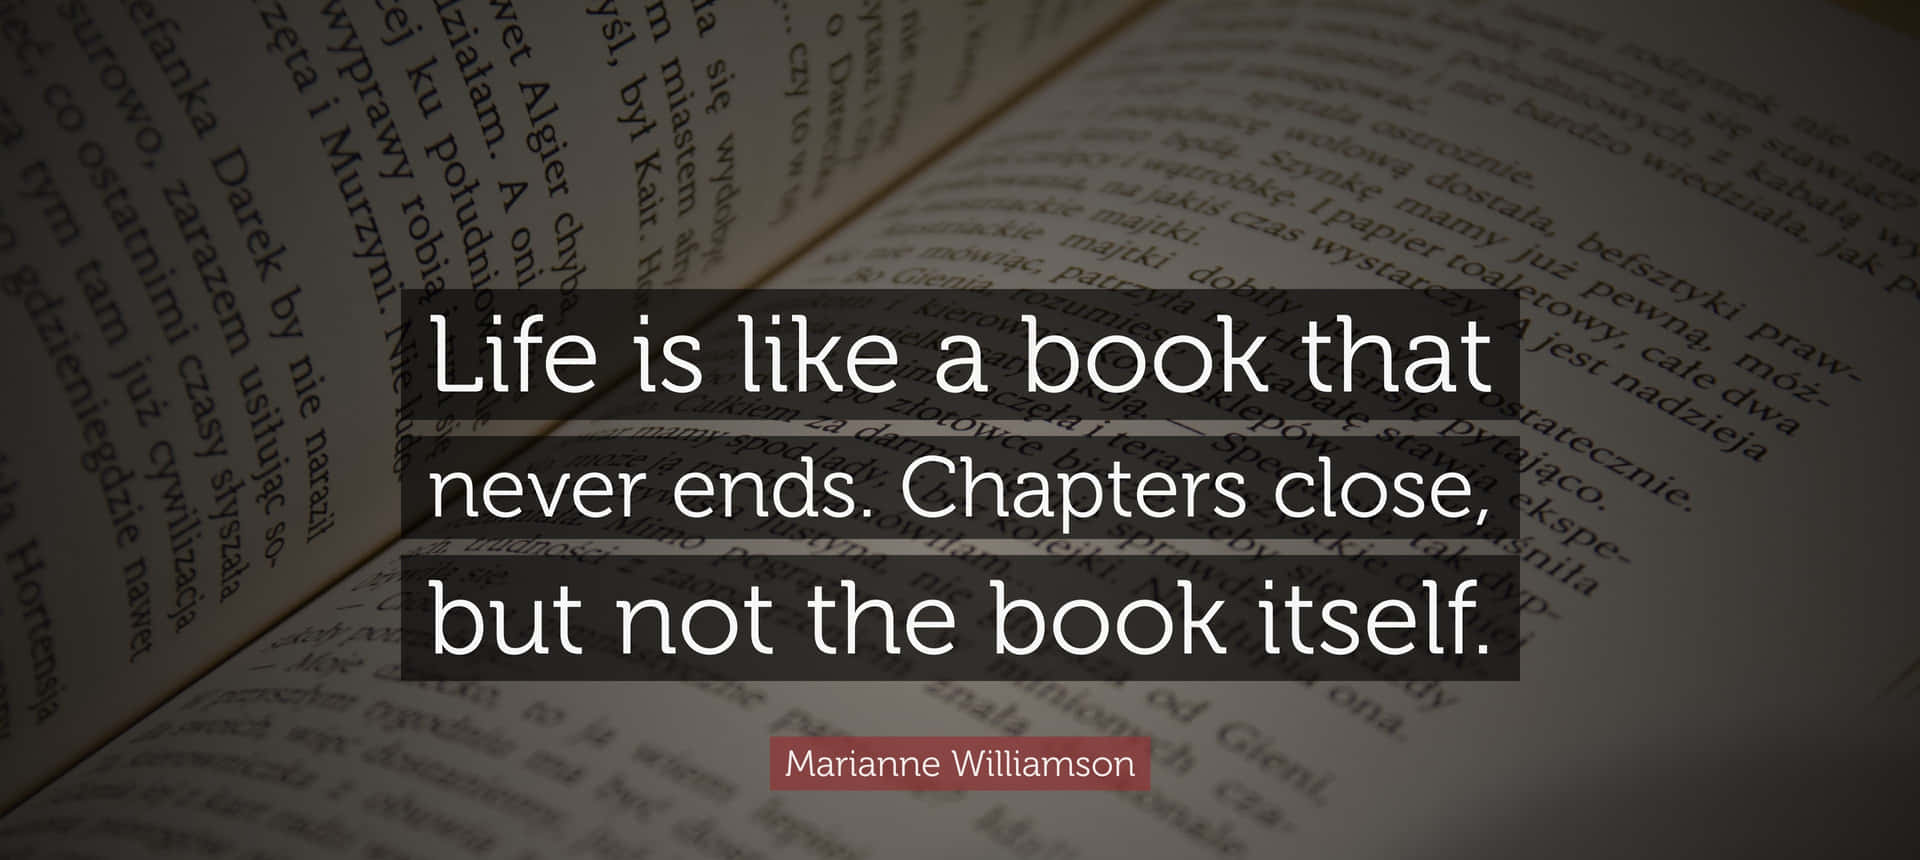 Inspirational Book Quote Life Chapters Wallpaper